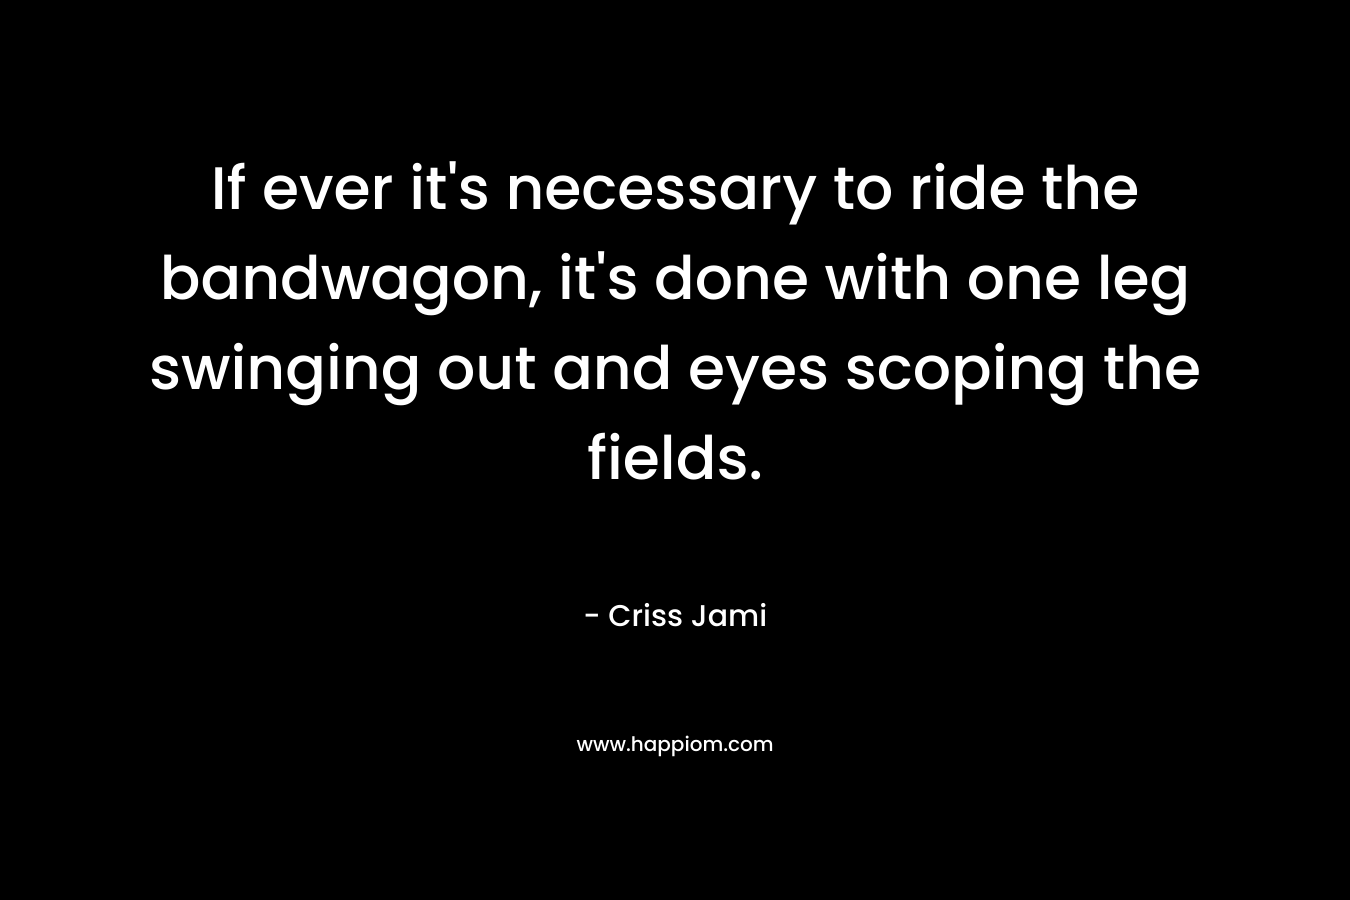 If ever it’s necessary to ride the bandwagon, it’s done with one leg swinging out and eyes scoping the fields. – Criss Jami